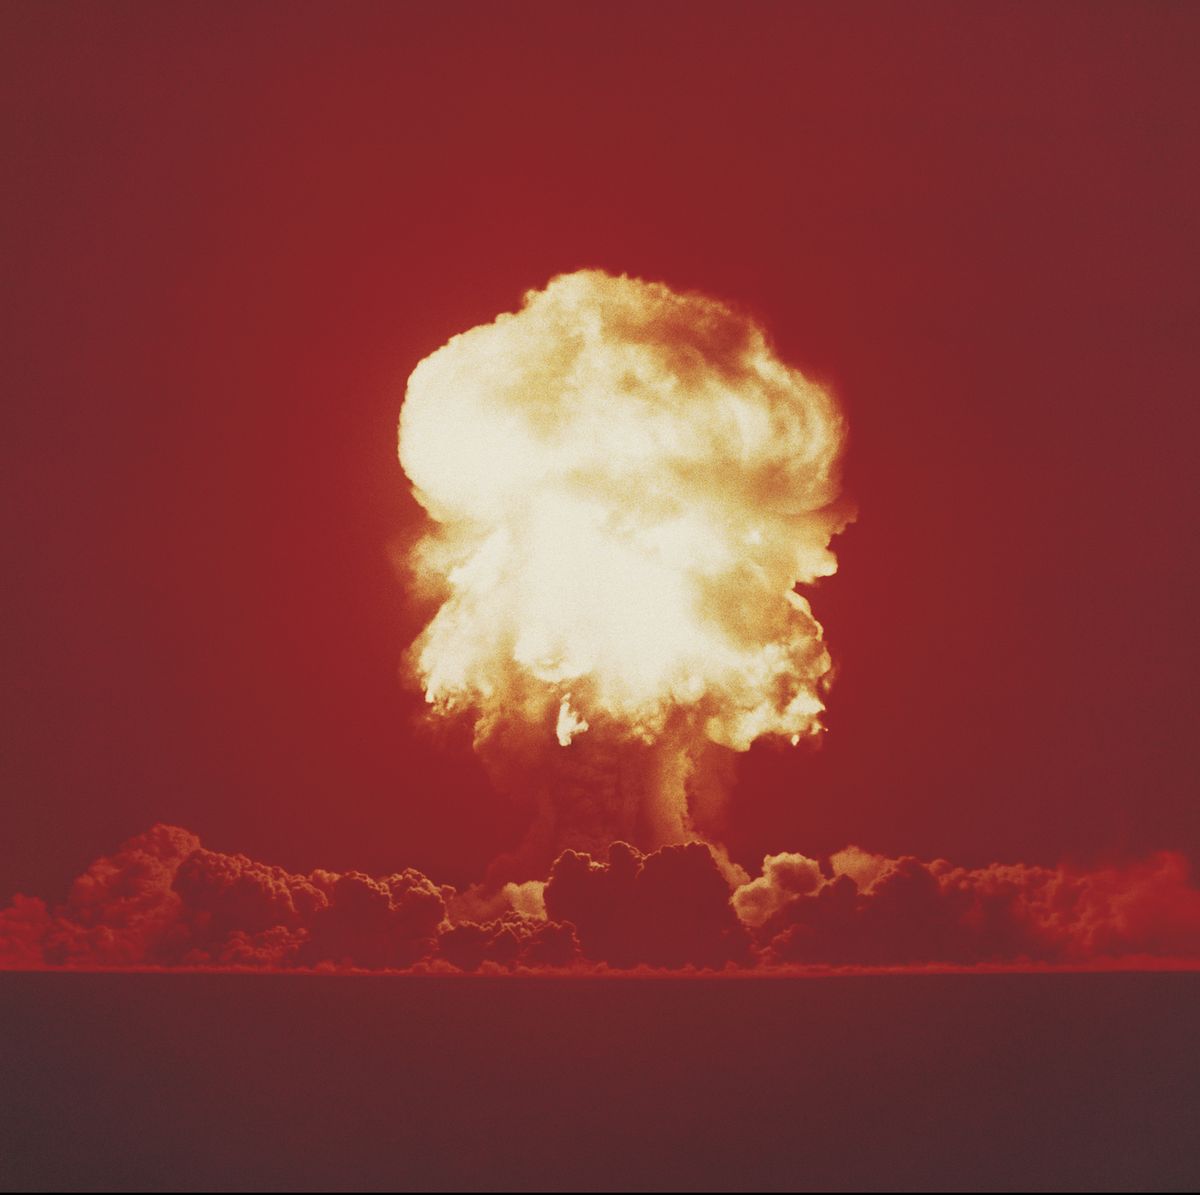 nuclear bomb test, nevada, june 18 1957, what would happen if all the nukes were launched